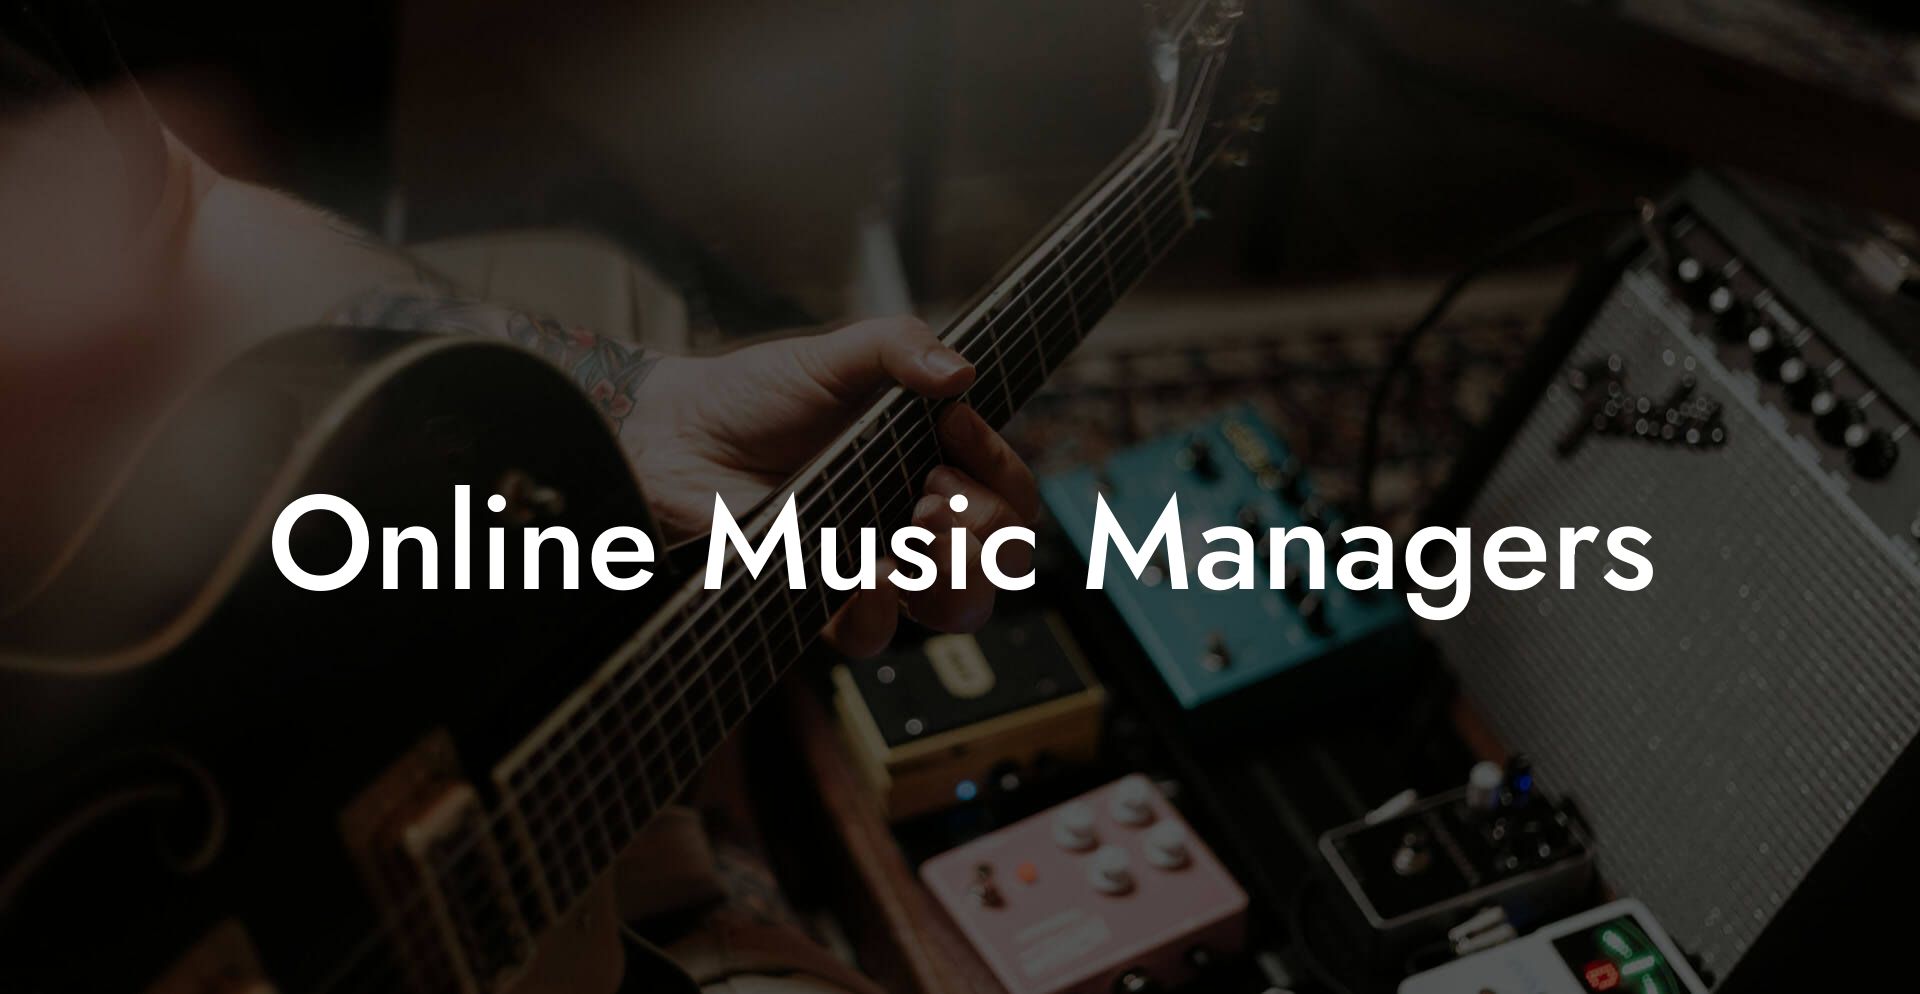 Online Music Managers